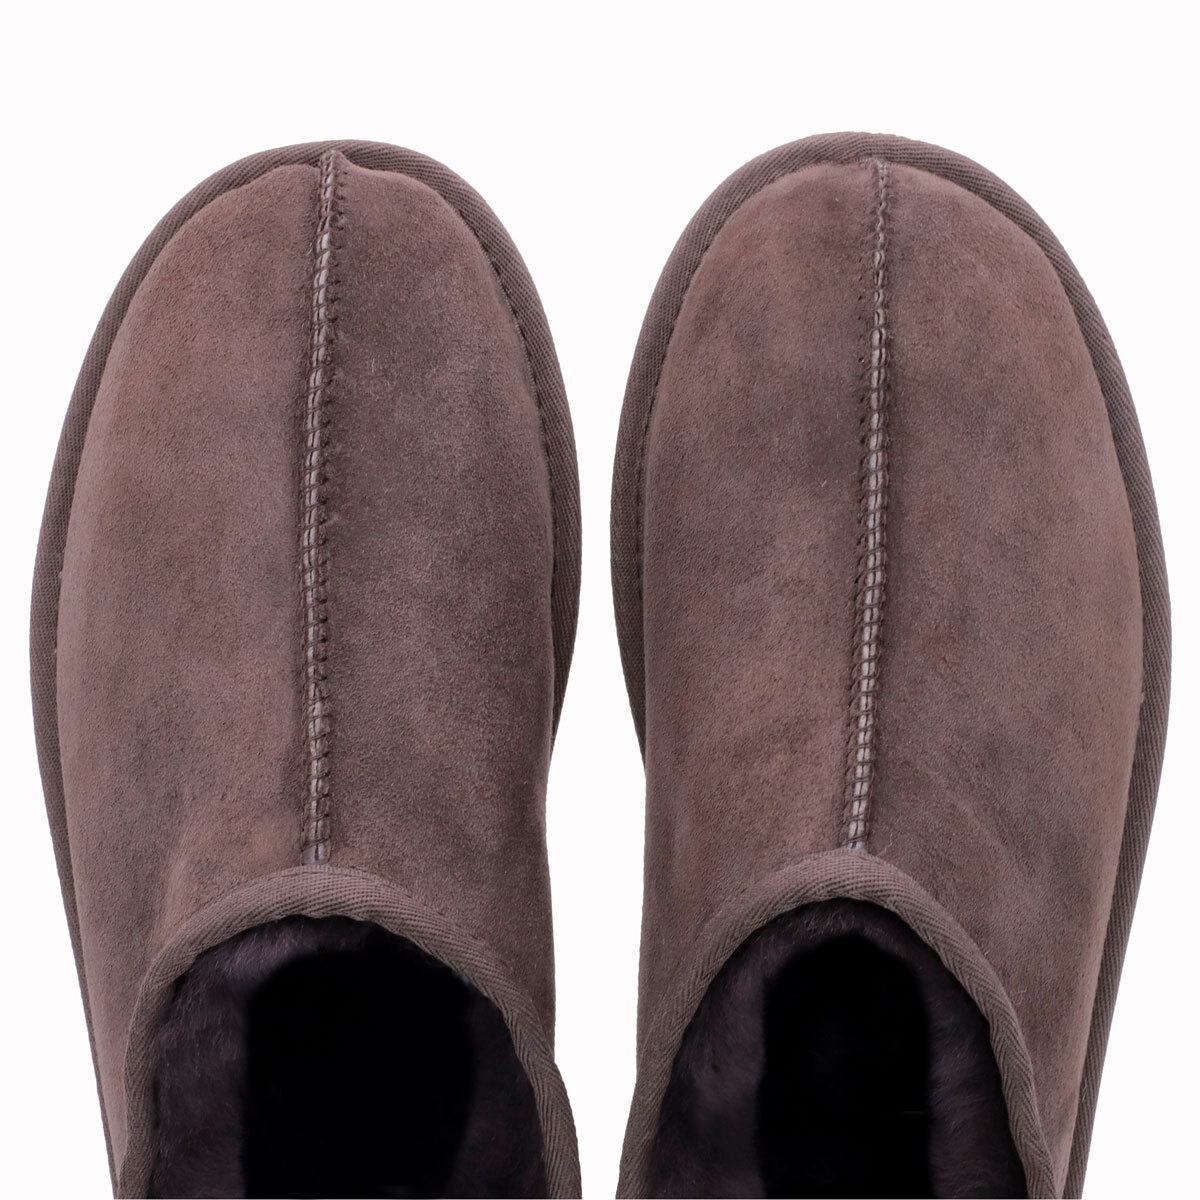 Kirkland Signature Men's Clog Shearling Slippers in Chocolate, Size 10 ...